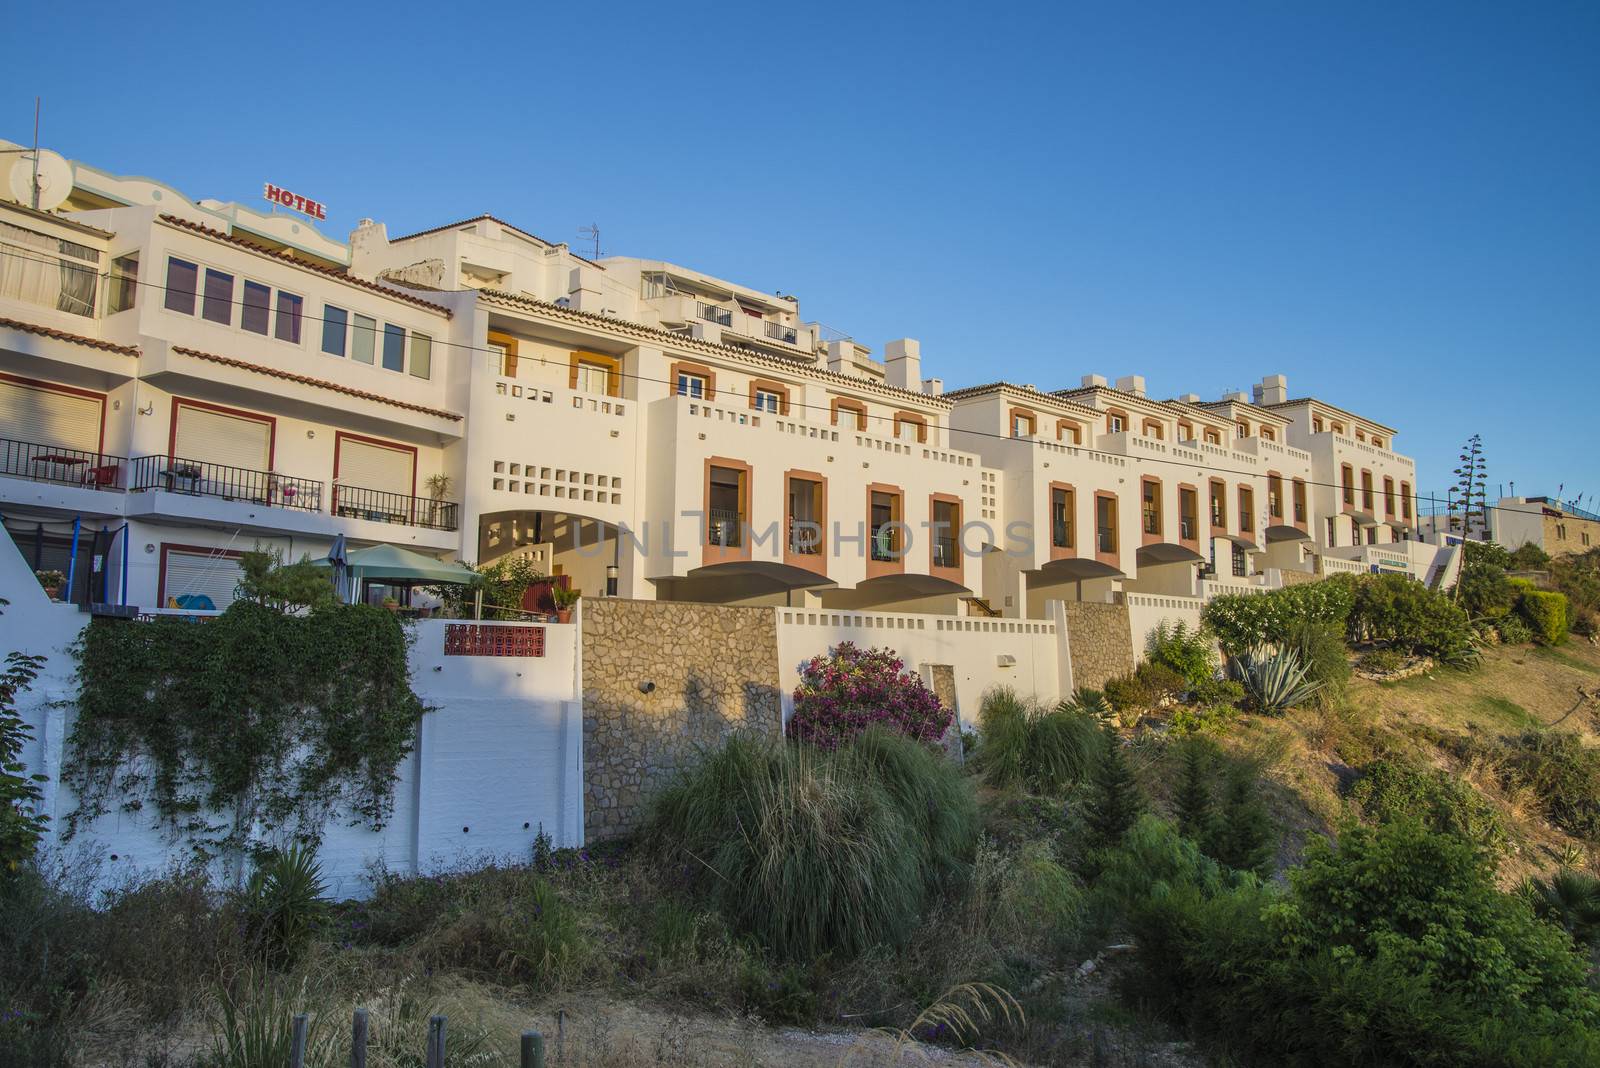 Apartamentos Os Descobrimentos is a beautiful family run complex of self catering apartments and villas in the picturesque fishing village of Burgau, Portugal.